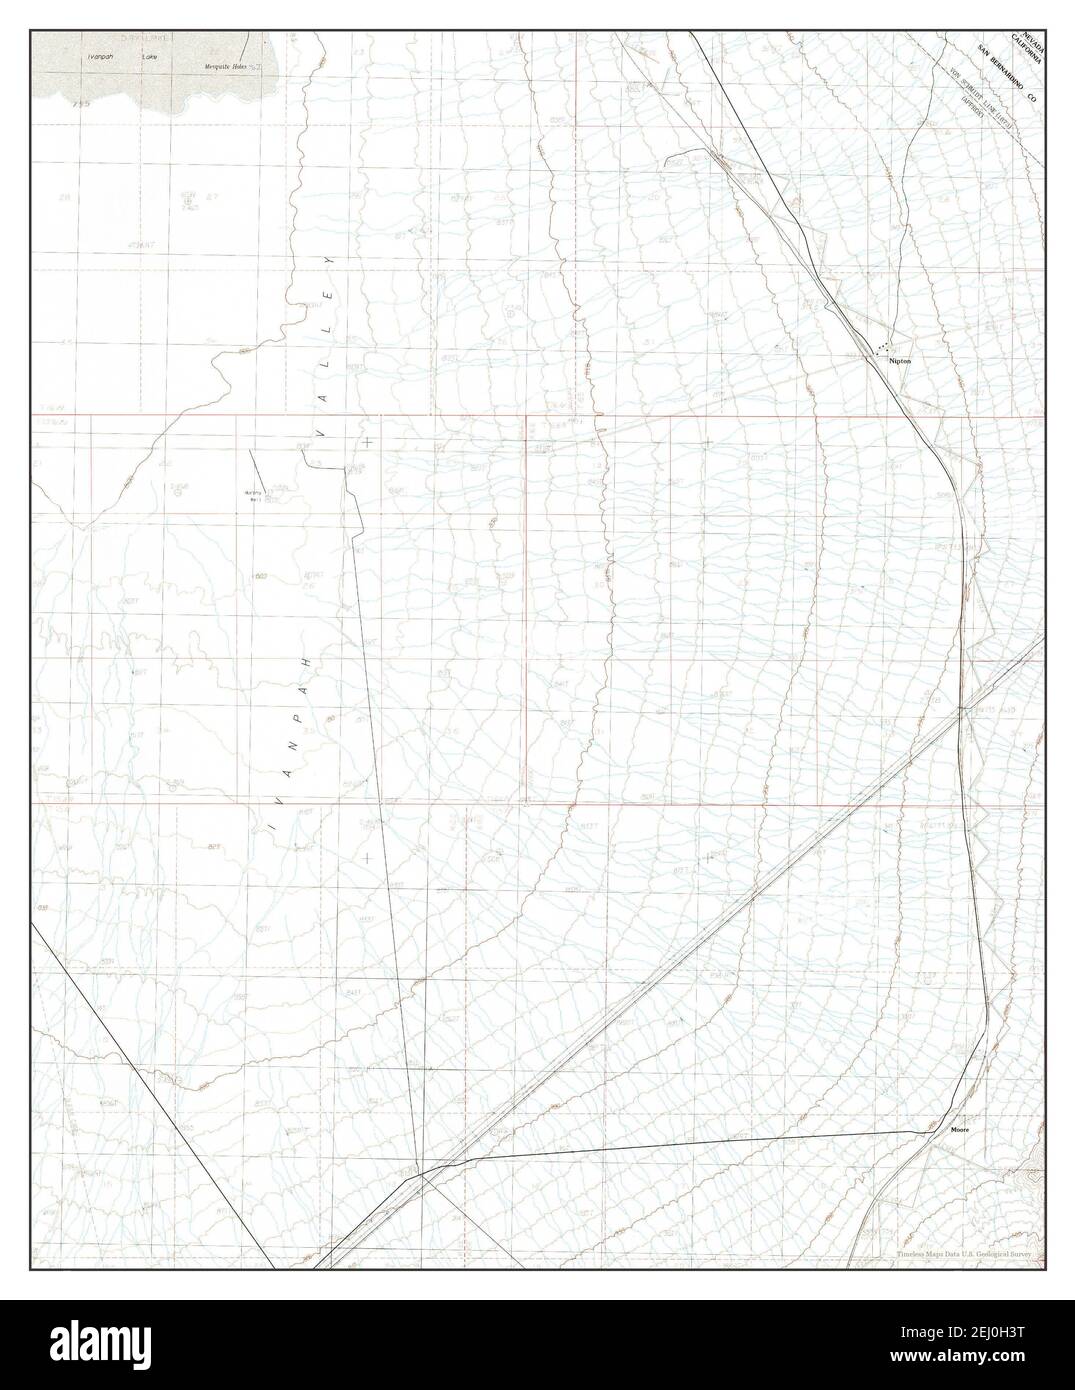 Nipton, Nevada, map 1983, 1:24000, United States of America by Timeless Maps, data U.S. Geological Survey Foto Stock